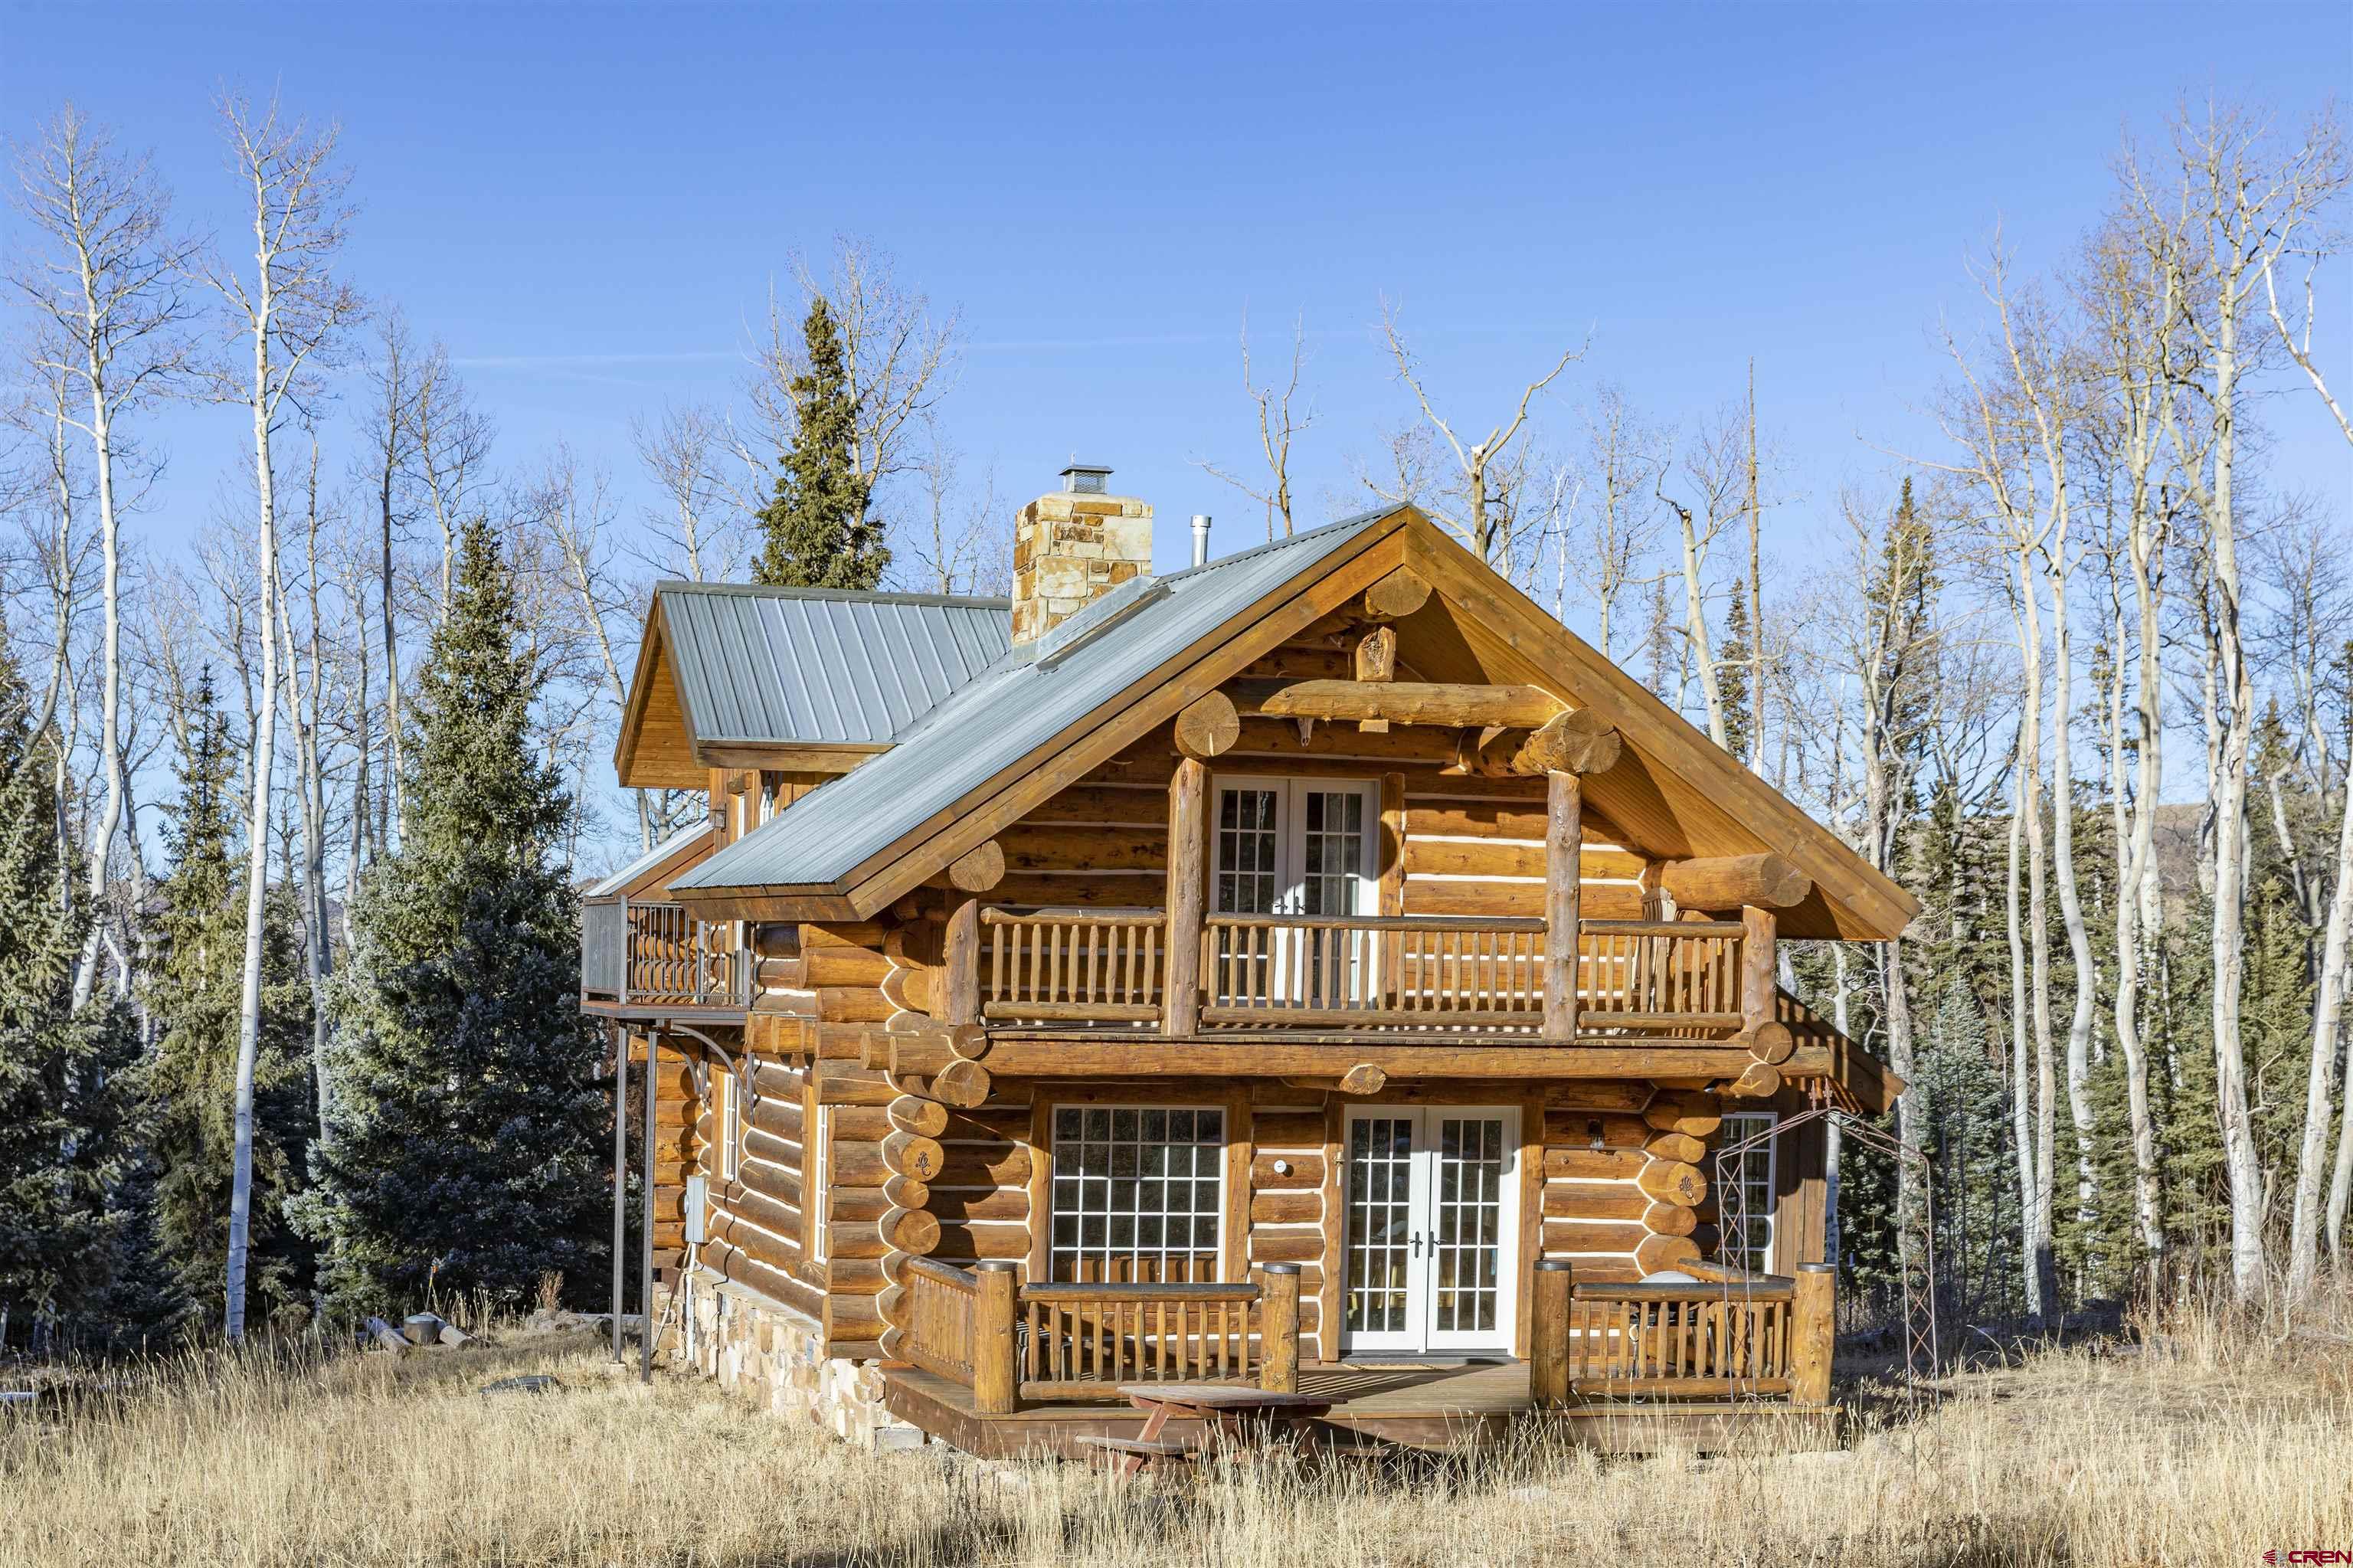 Spectacular Mountain Chalet, affectionately known as ''Flying Elk'', located on Hastings Mesa at the base of the Sneffels mountains in San Juan Vista on 7 very private acres surrounded by aspens. A Ted Moews custom designed and built log home for this original owner is made of hand hewn logs and has all the amenities: dishwasher, washer/dryer, microwave, refrigerator, gas range, custom oak cabinets, silestone quartz kitchen counters, in floor hydronic heating, and a Hughes Net satellite system. Solid hickory floors, a Rumford fireplace and custom true divided light French doors and windows with custom log window buck frames that are truly special. 3 large decks framed with copper rails and one iron Truman balcony off the second story guest bedroom.  This property has maximum southern exposure and views of western sunsets. The East property line of this home borders the Double RL ranch so the privacy is incredible. To the South you have direct access to the adjoining Sneffels Wilderness area and the San Juan National Forest. This is the perfect mountain retreat for Hunting, Hiking, Ski Mountaineering (Hayden and North Pole Peaks are essentially in the backyard!) mountain biking (San Juan Hut system Hut is a mile away) mushrooming, nordic skiing etc. About any mountain activity you can think of is out the door."